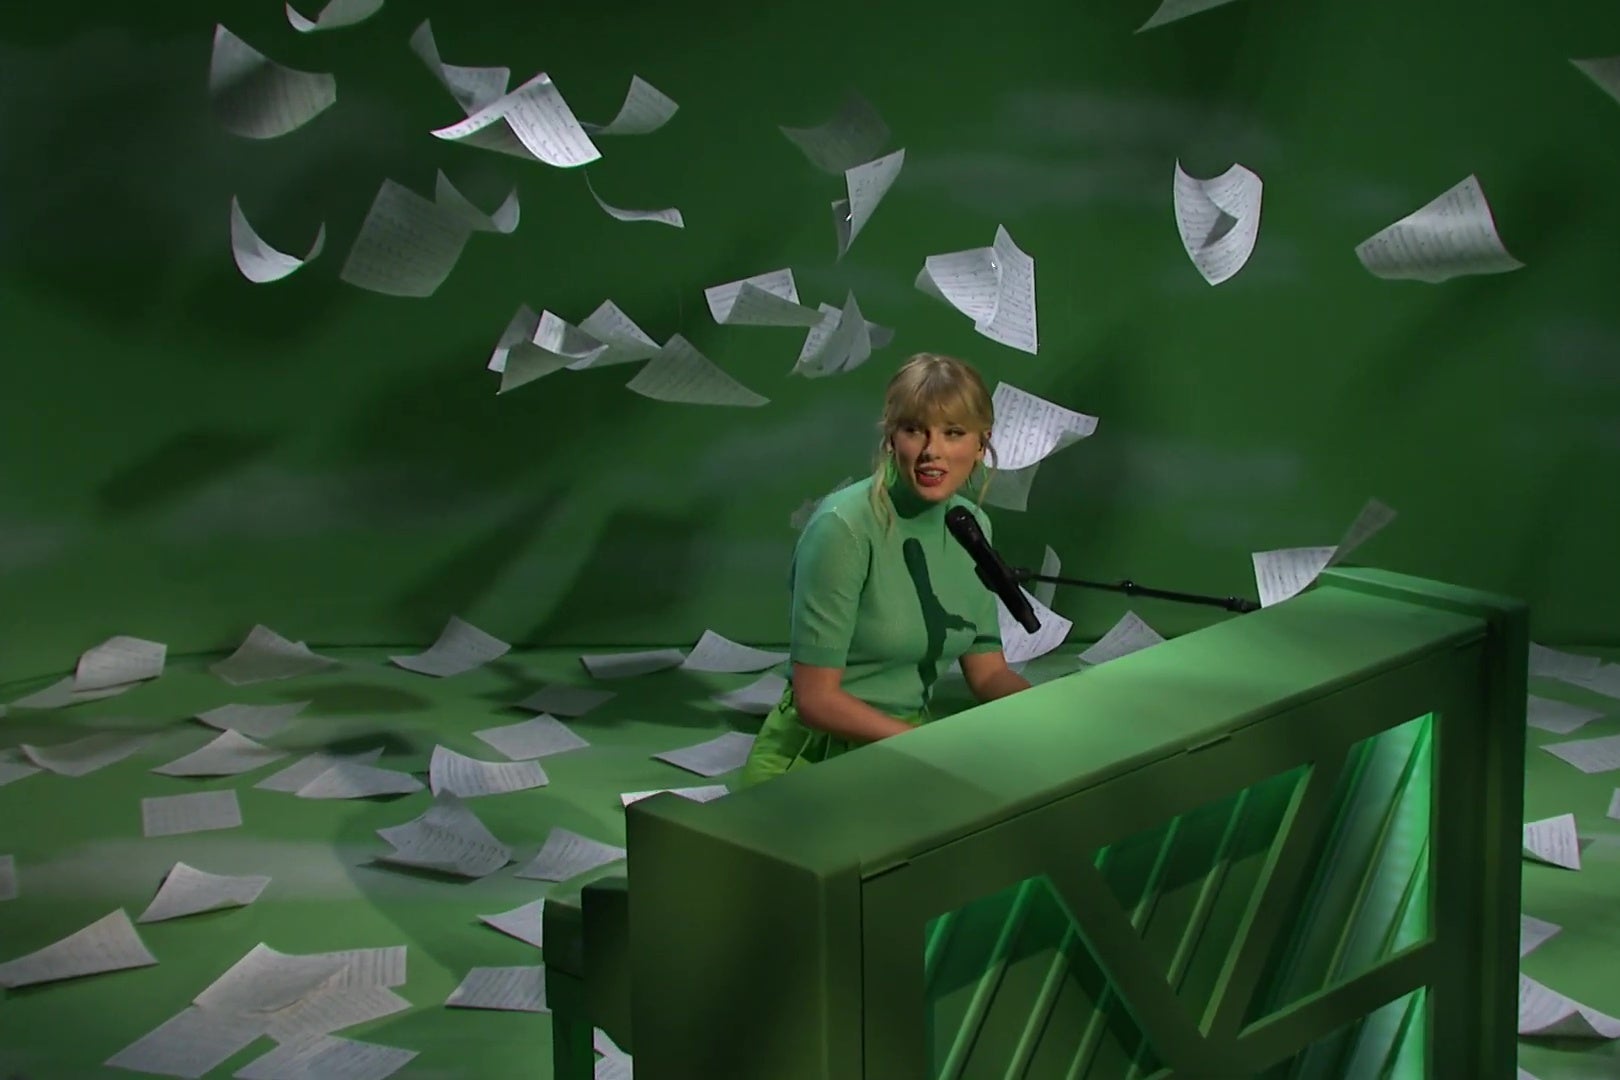 Taylor Swift plays a green piano on a green stage.